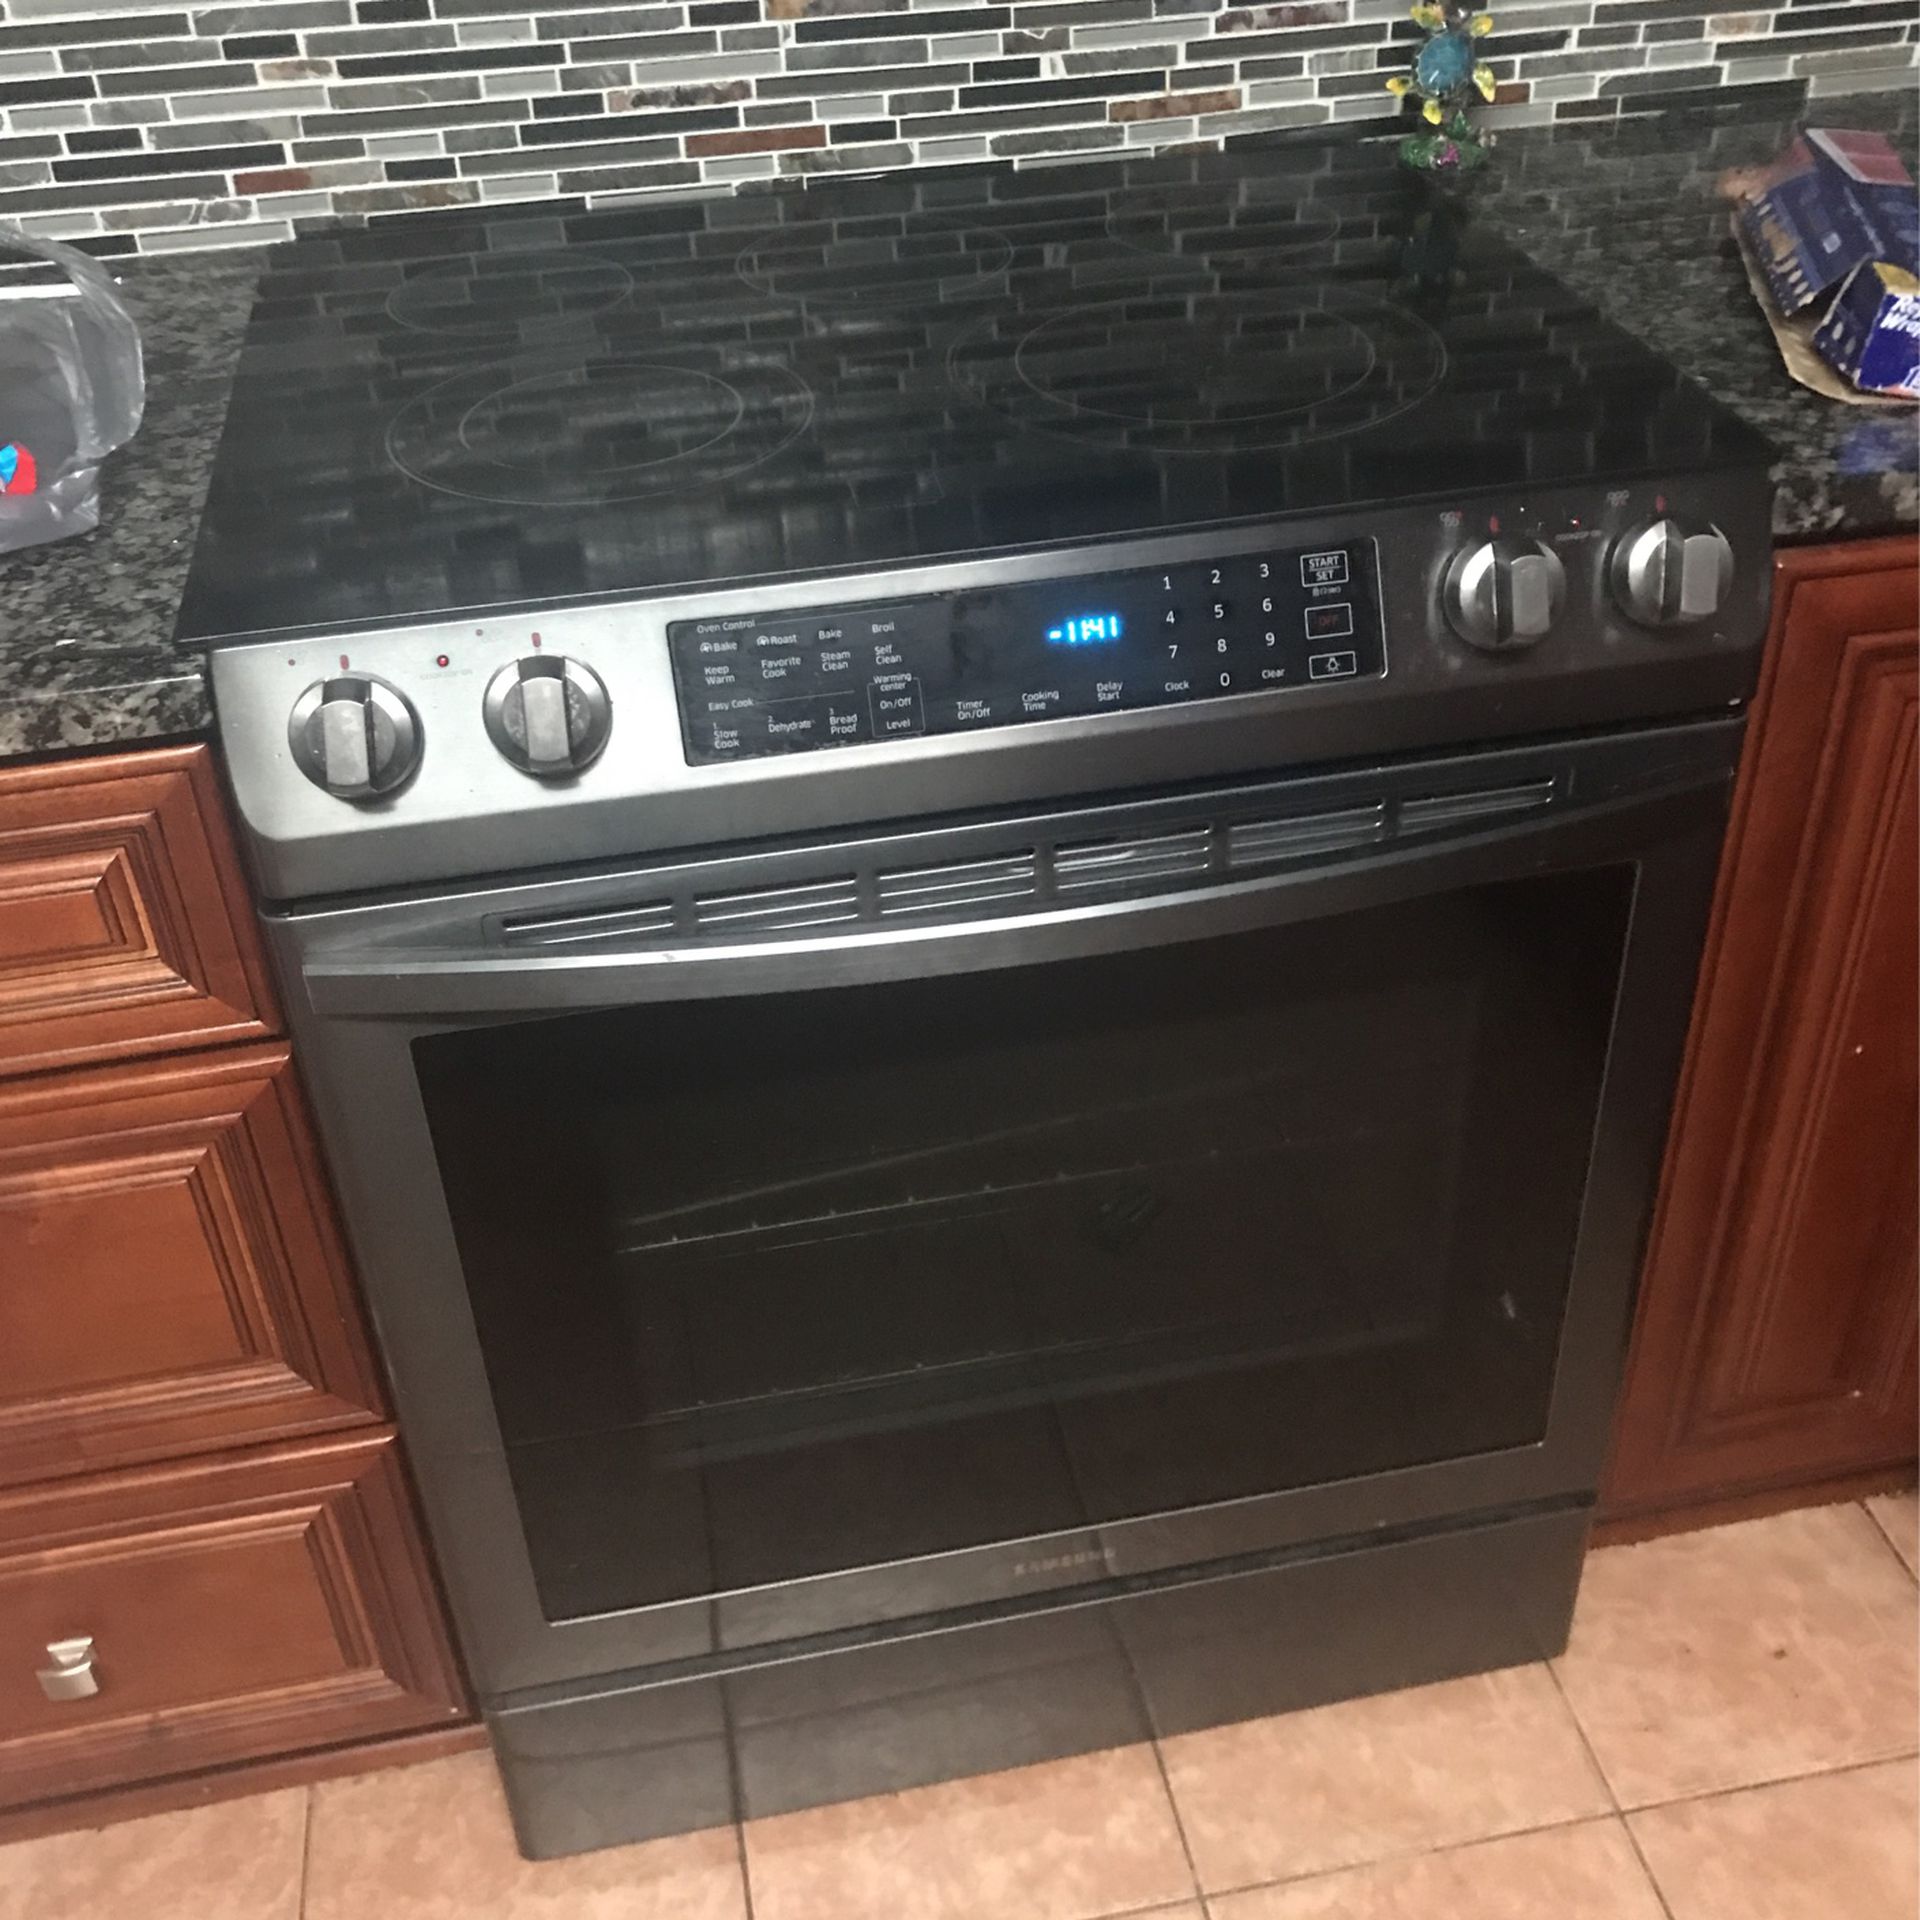 Samsung Kitchen appliance Refrigerator Has A Hub Tv 1 year old paid over $8000 for the Whole Set